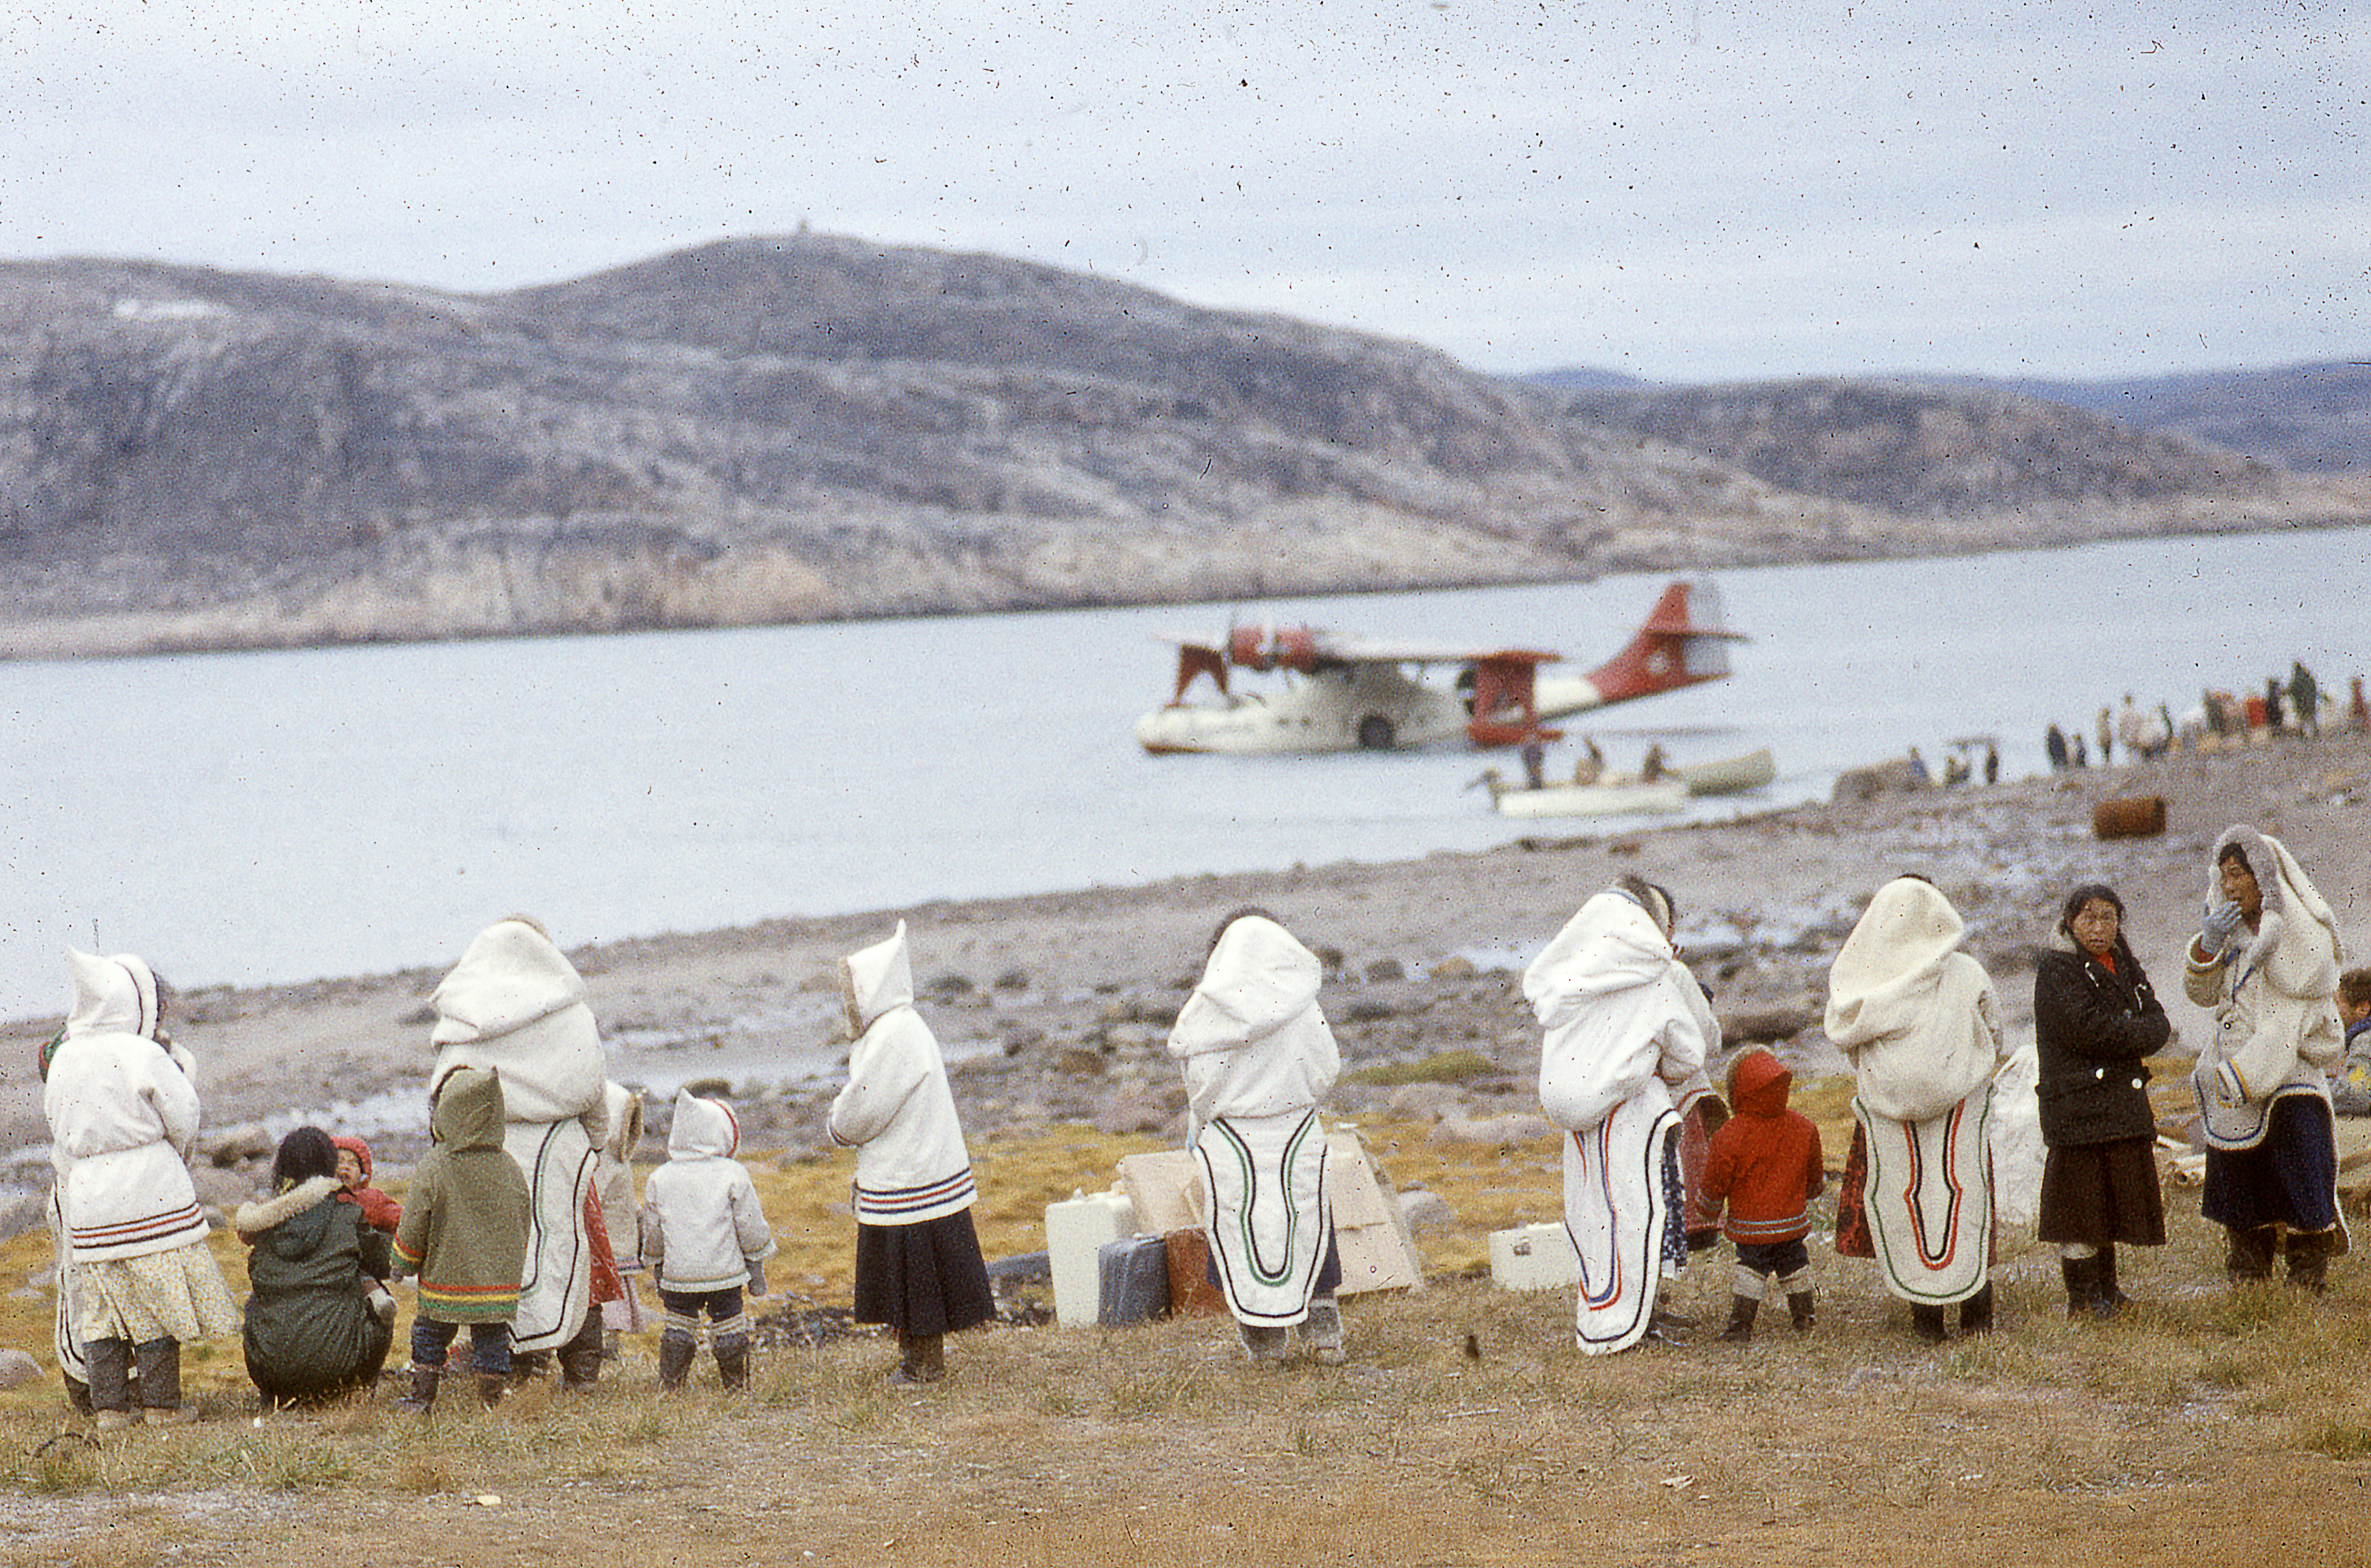 Several women and children watch the seaplane land in Cape Dorset, 1960